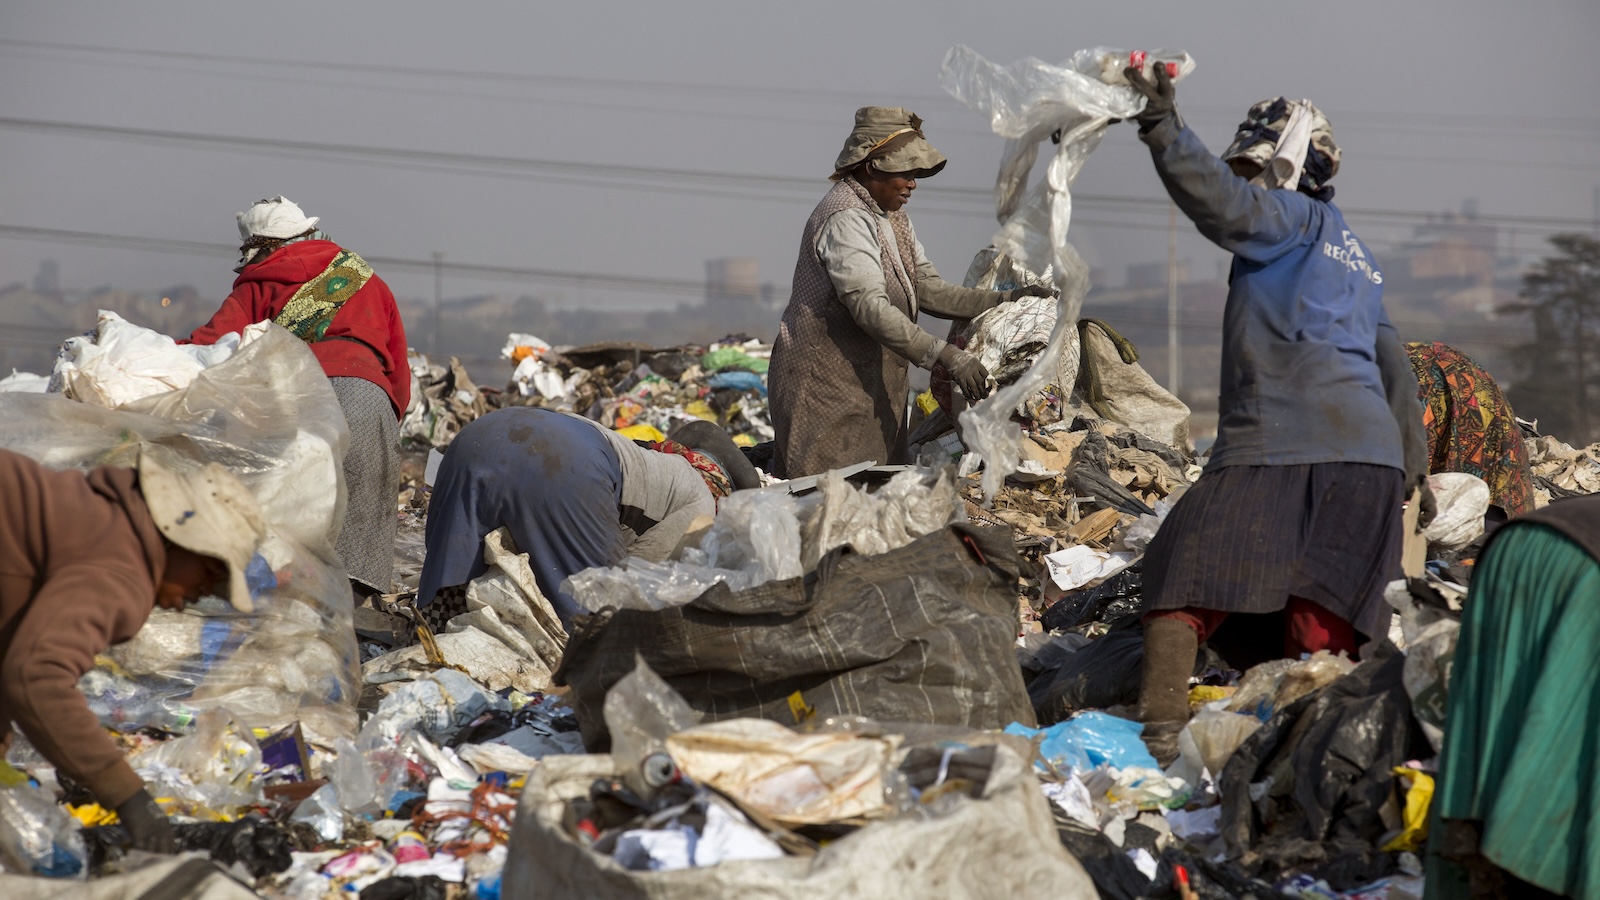 A group of waste pickers pick up trash from a dumpsite.